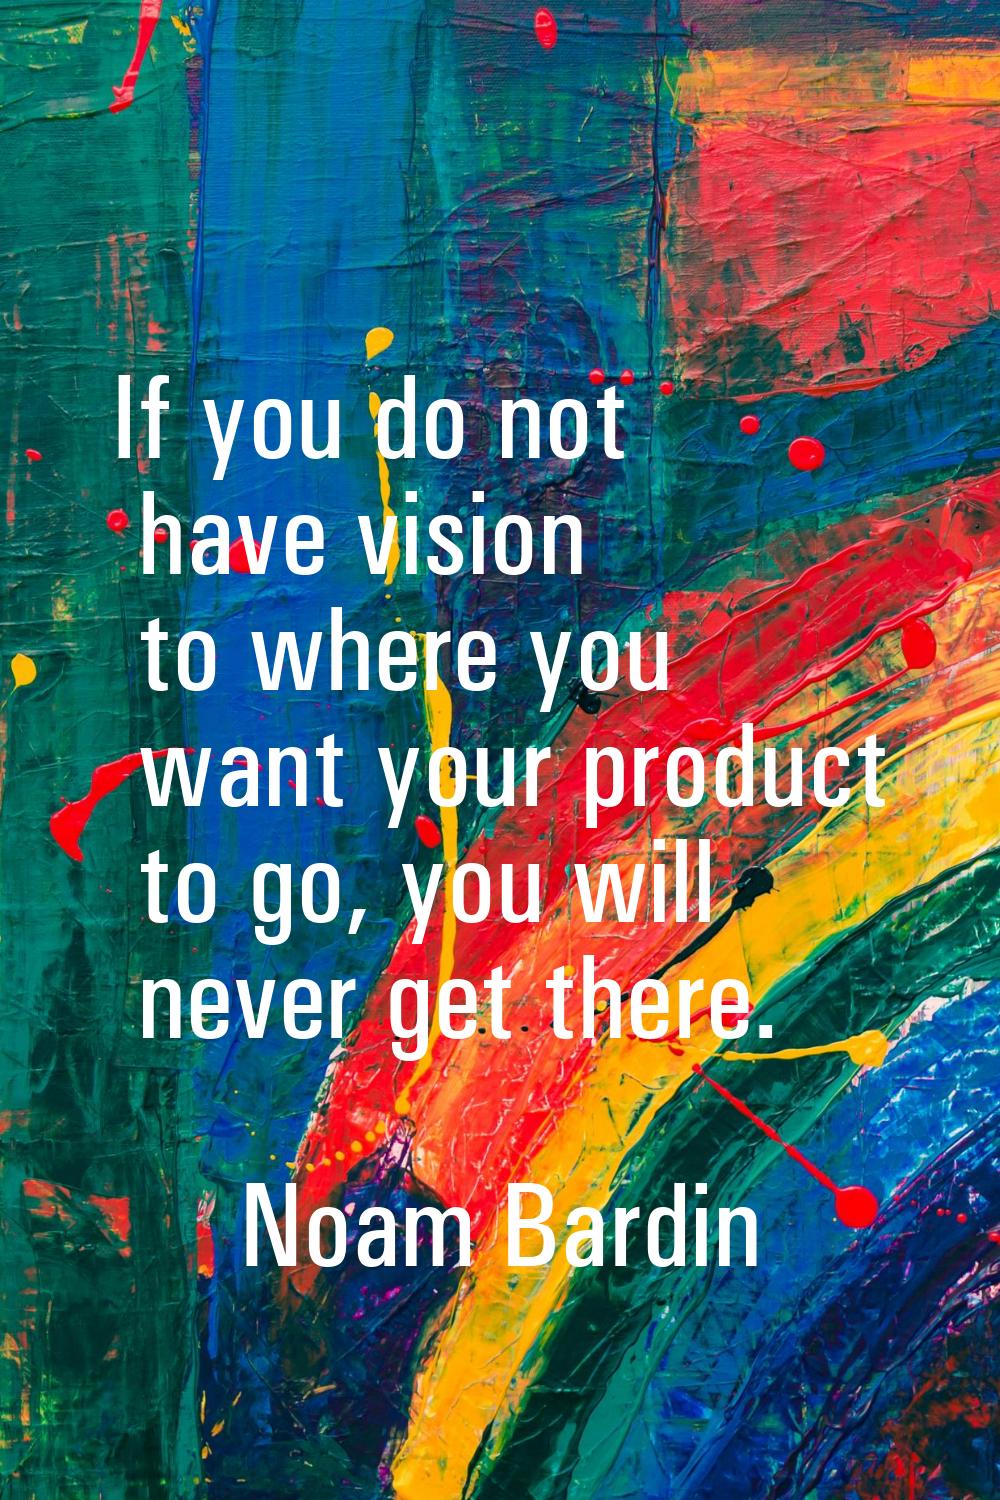 If you do not have vision to where you want your product to go, you will never get there.